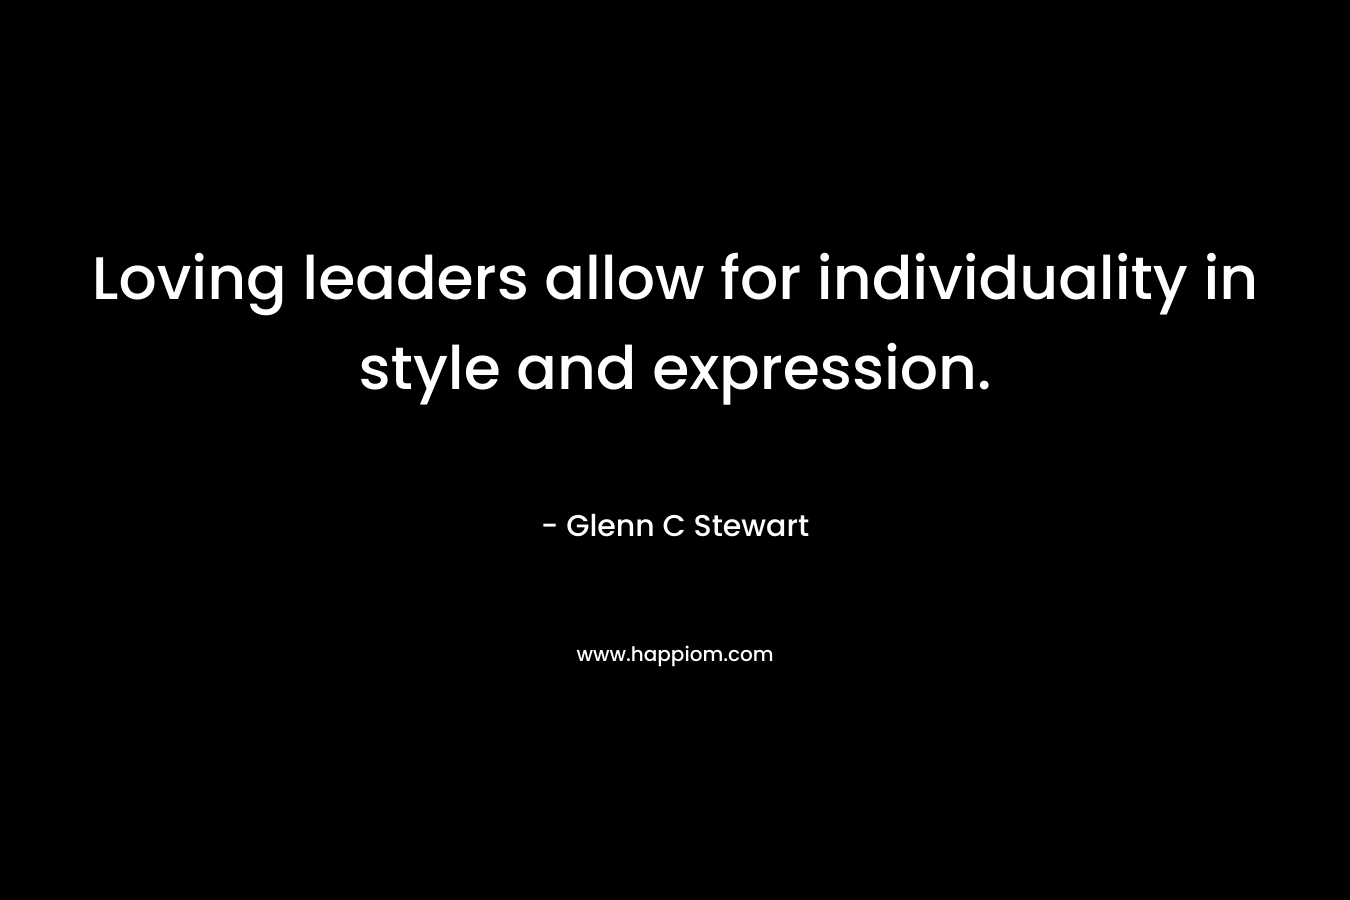 Loving leaders allow for individuality in style and expression.